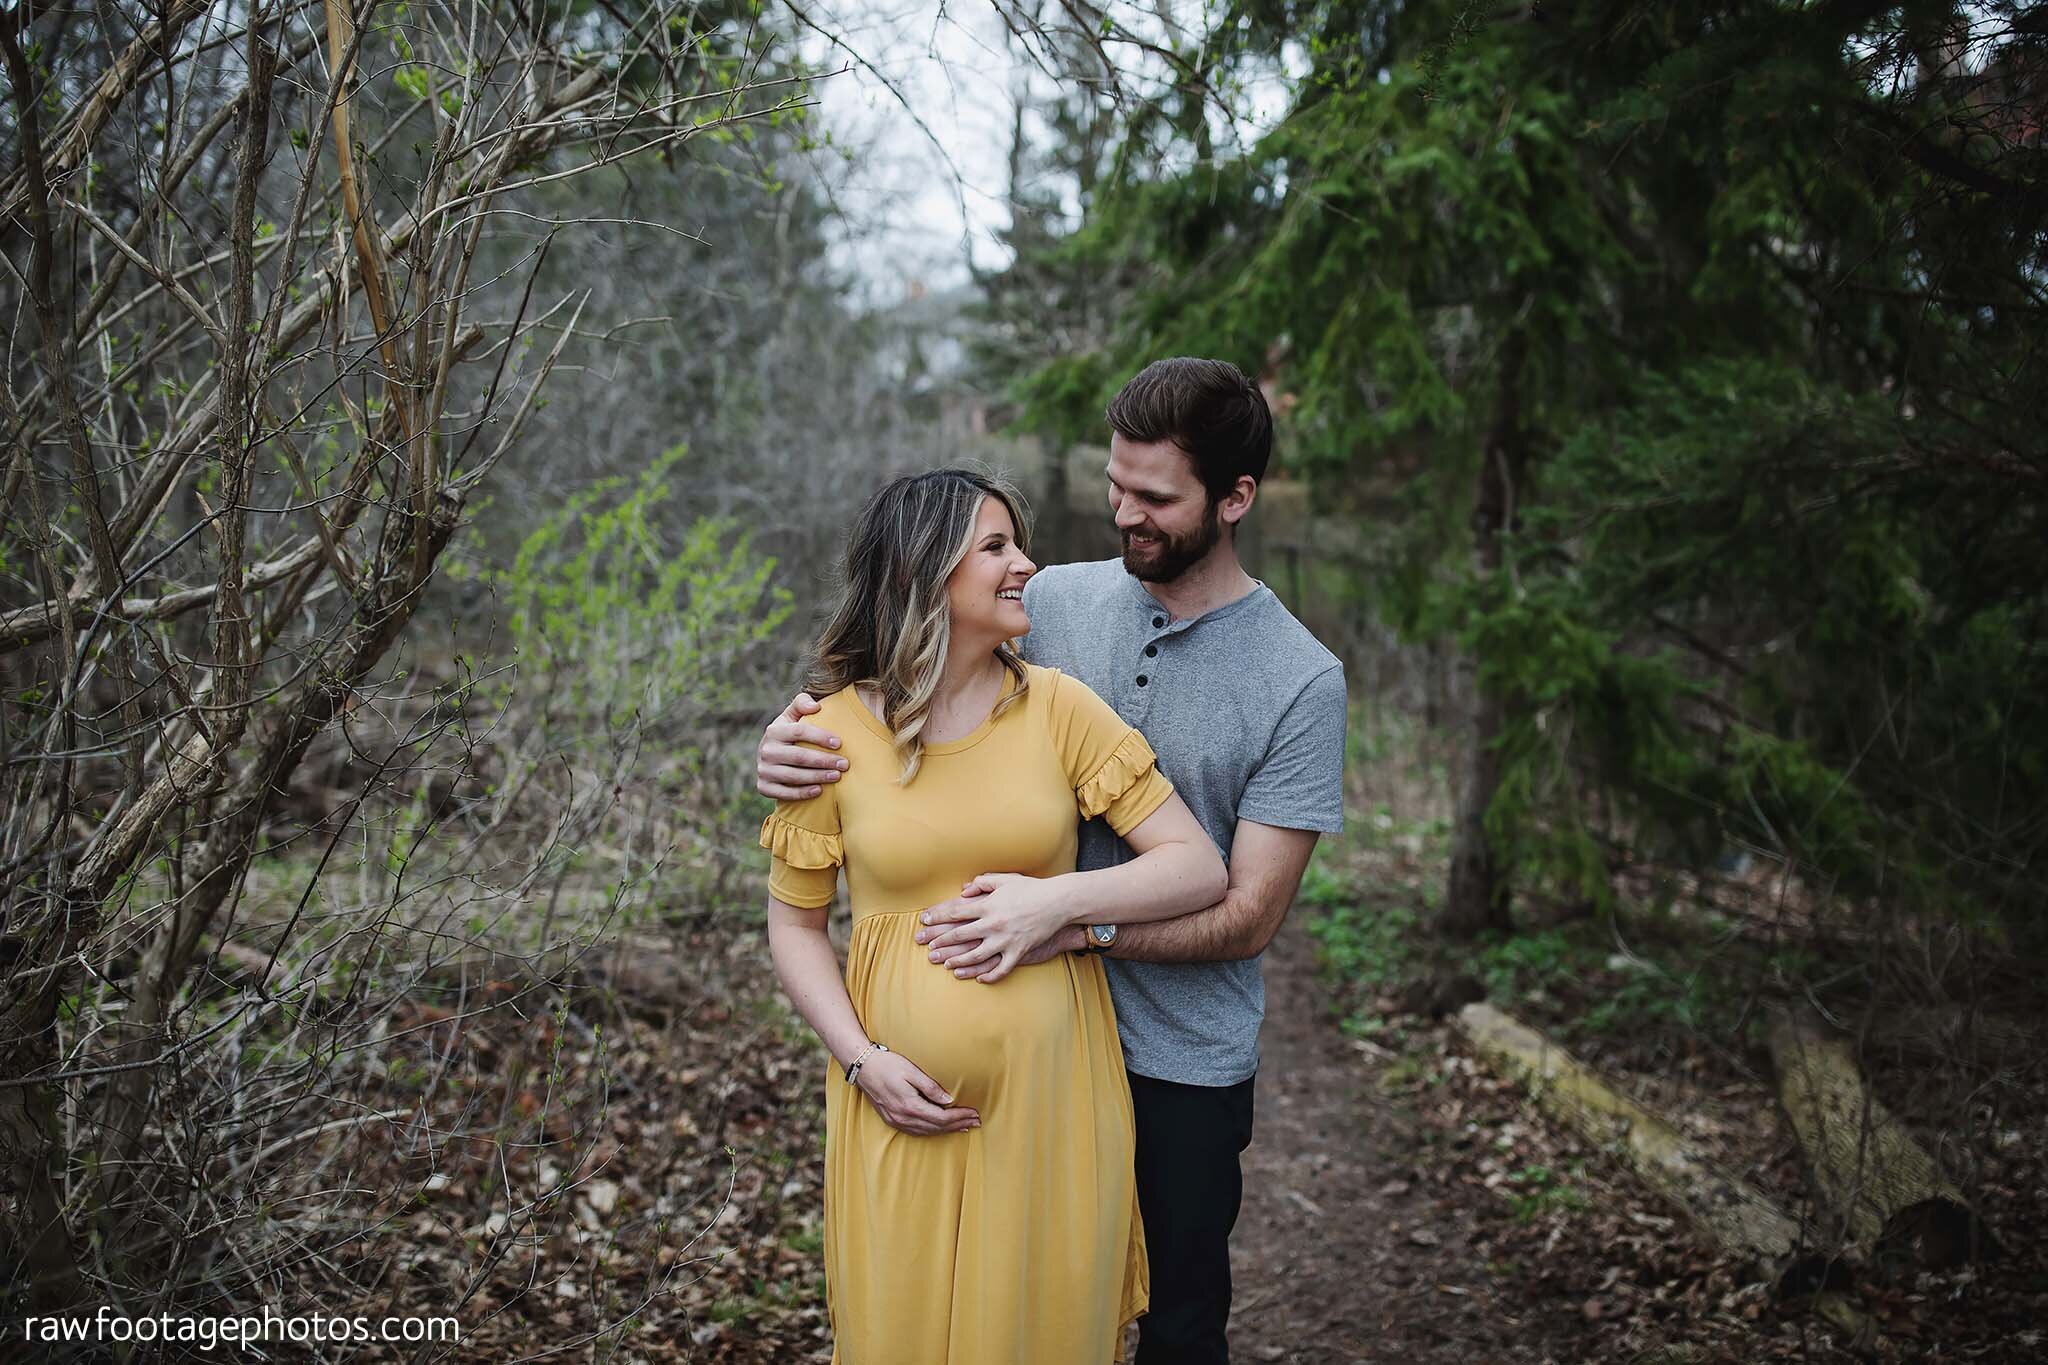 london_ontario_maternity_photographer-raw_footage_photography-in_home_lifestyle_maternity-forest_maternity_session-yellow_maternity_dress_021.jpg